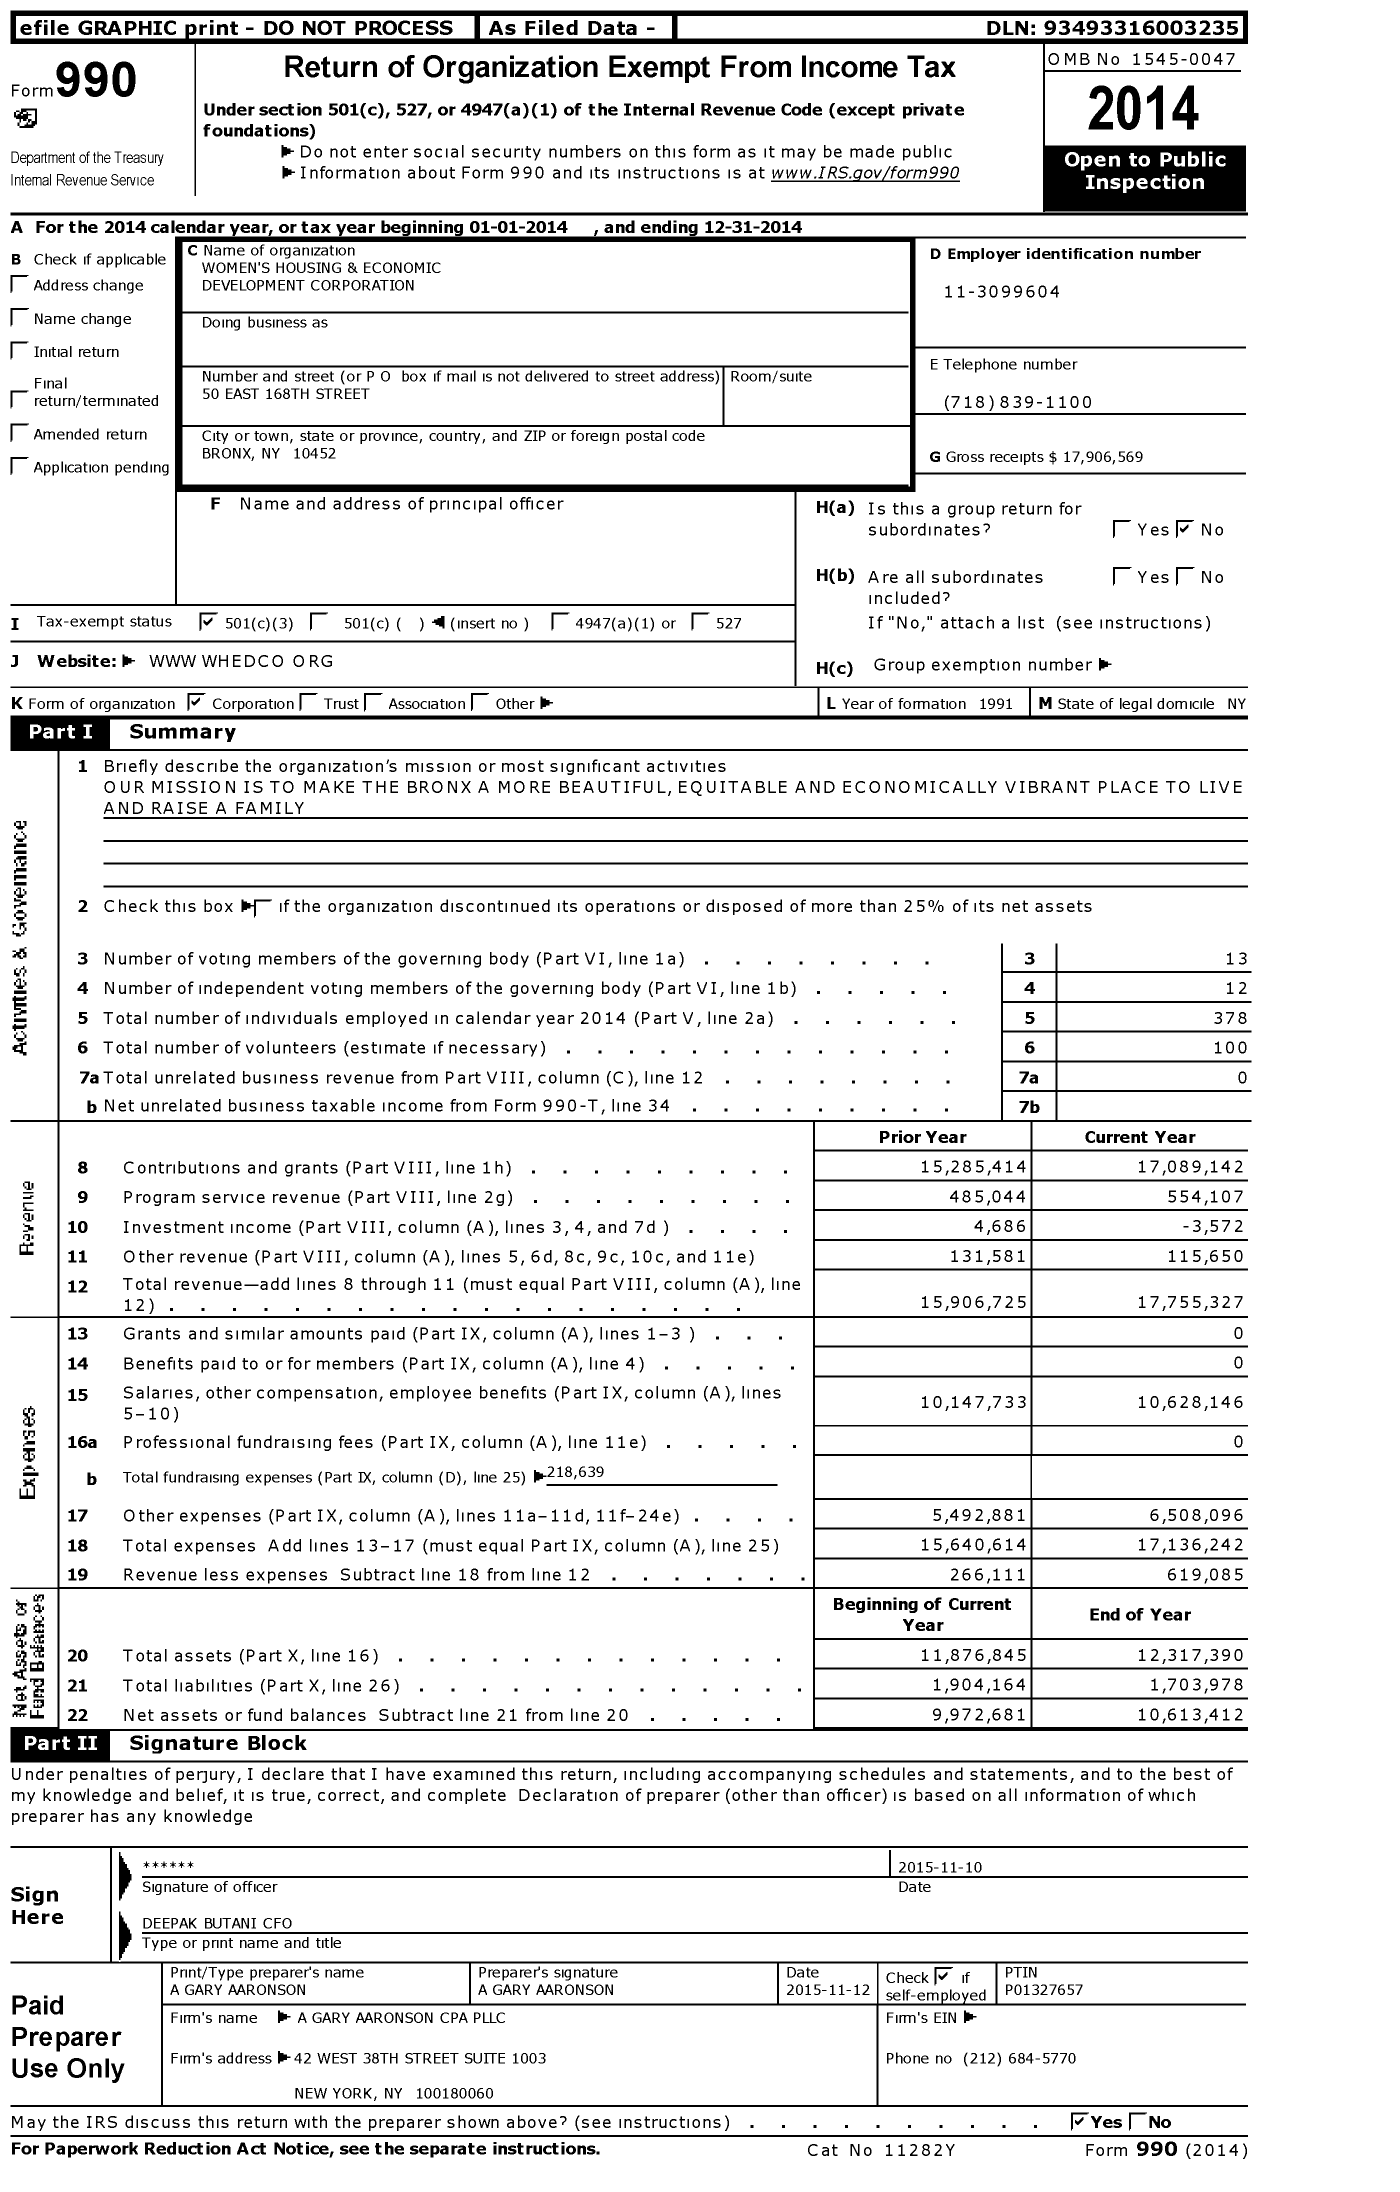 Image of first page of 2014 Form 990 for WOMEN'S Housing and Economic Development Corporation (WHEDco)